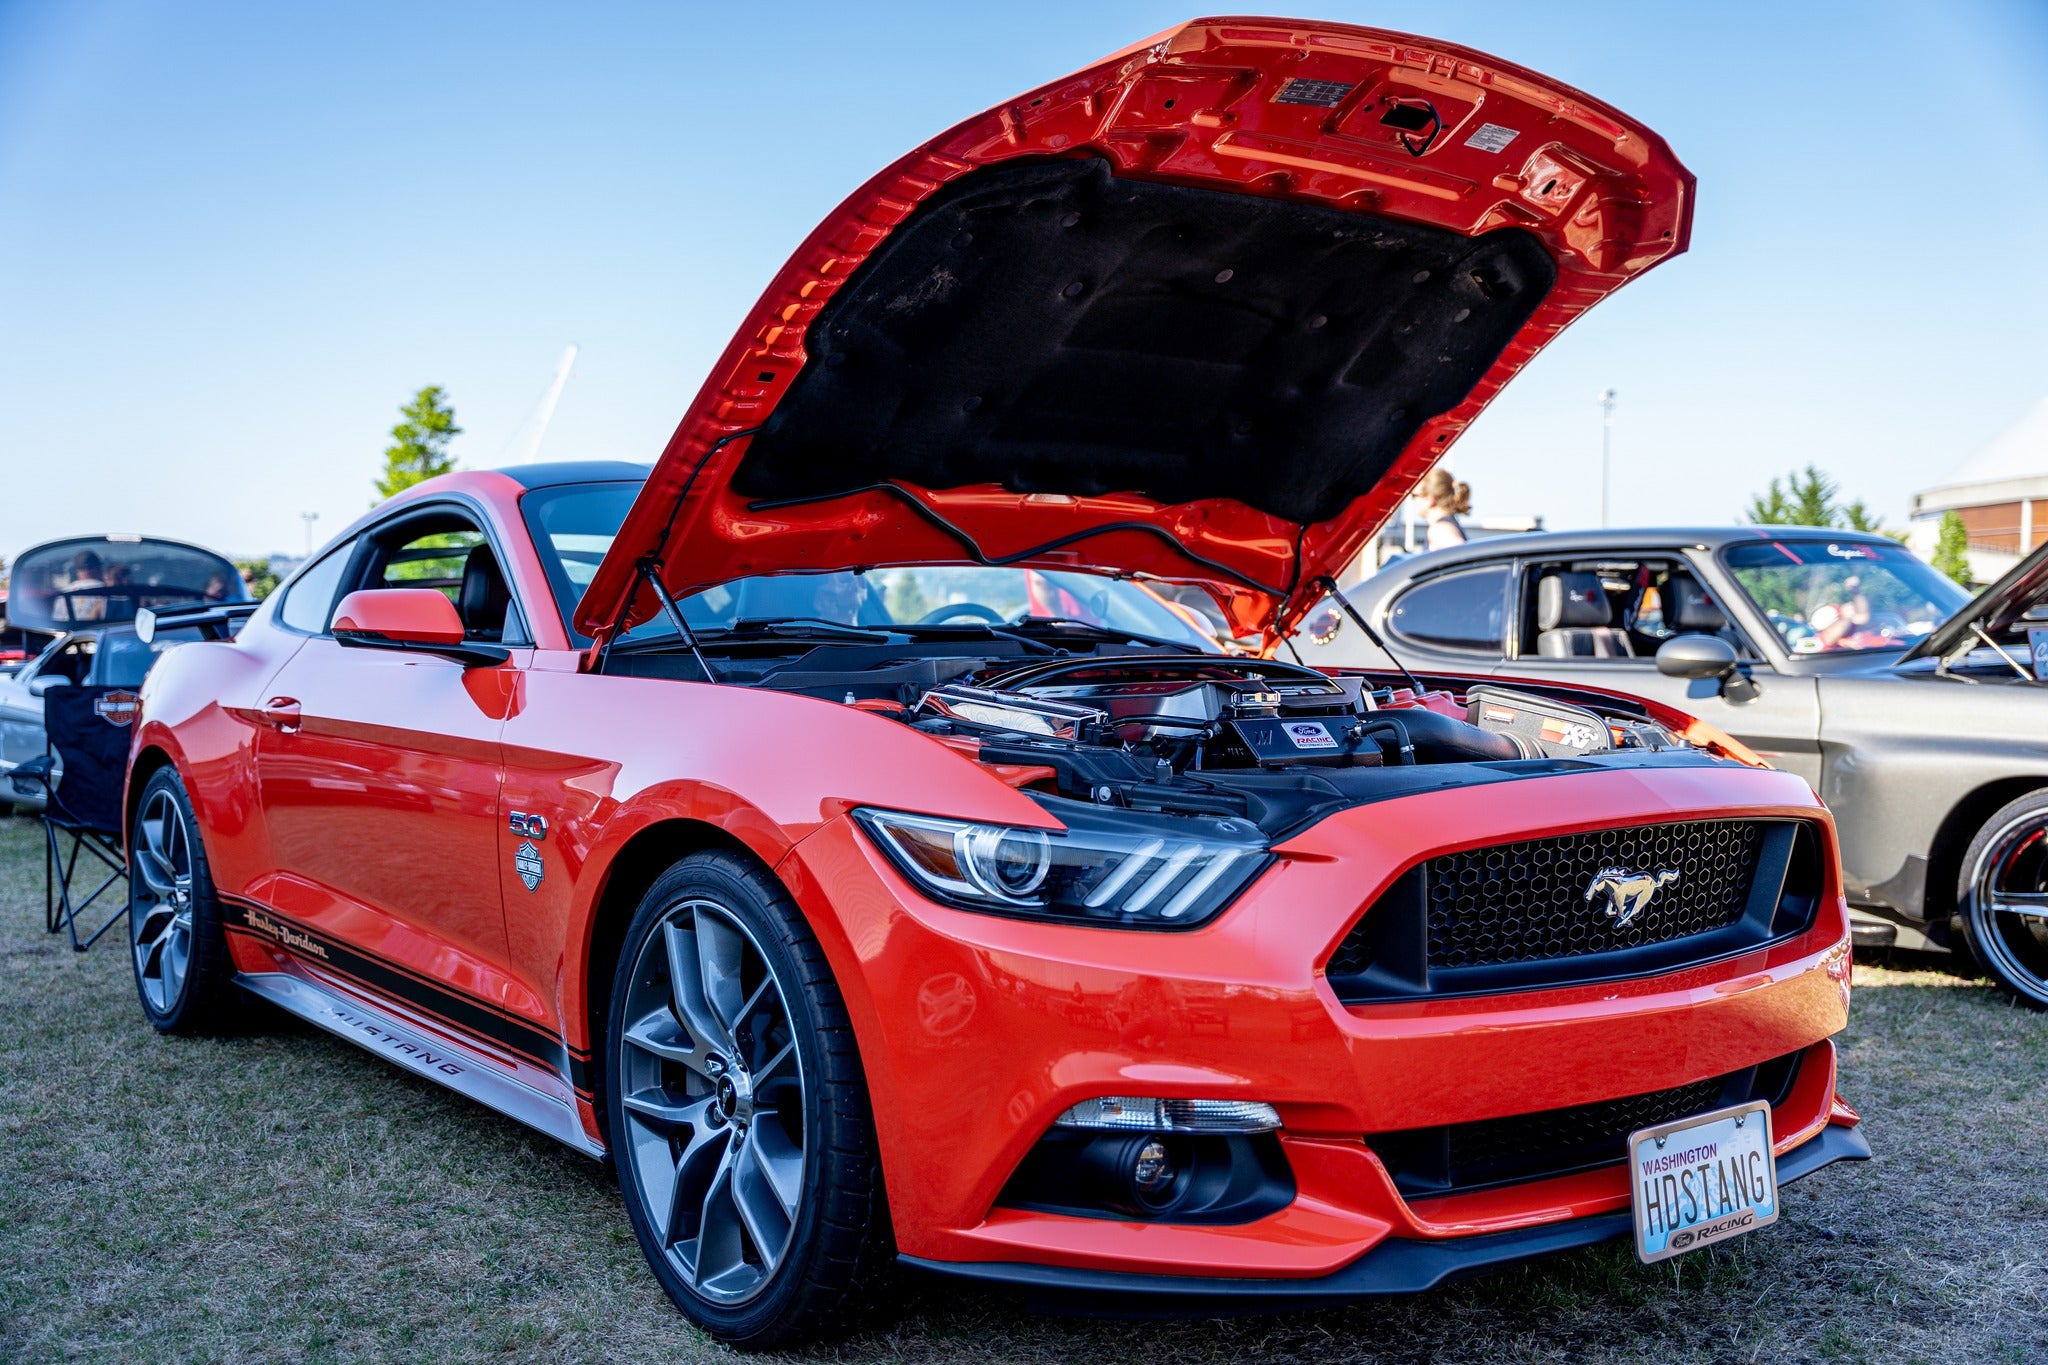 Ford Mustang Cruise-In at LeMay - America's Car Museum